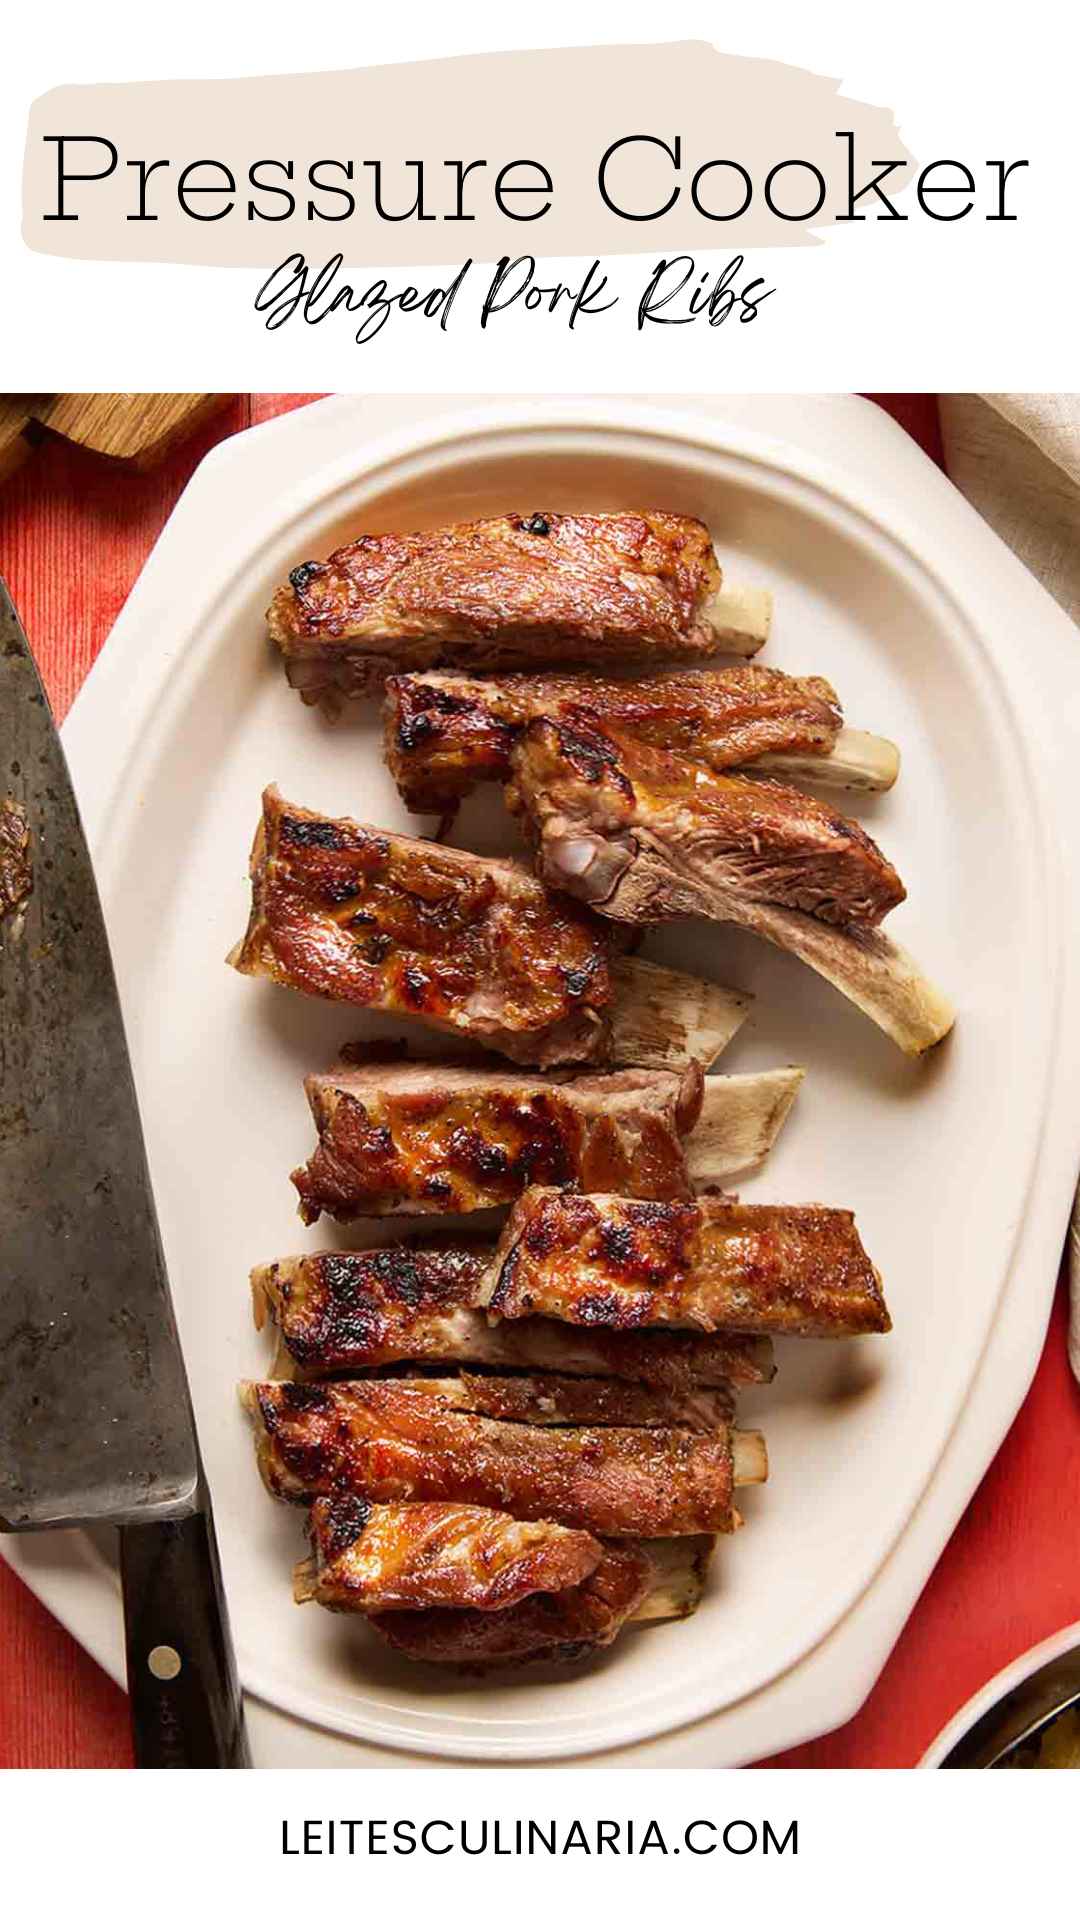 A platter of pressure cooker ribs cut into individual ribs, with a carving knife on the side.